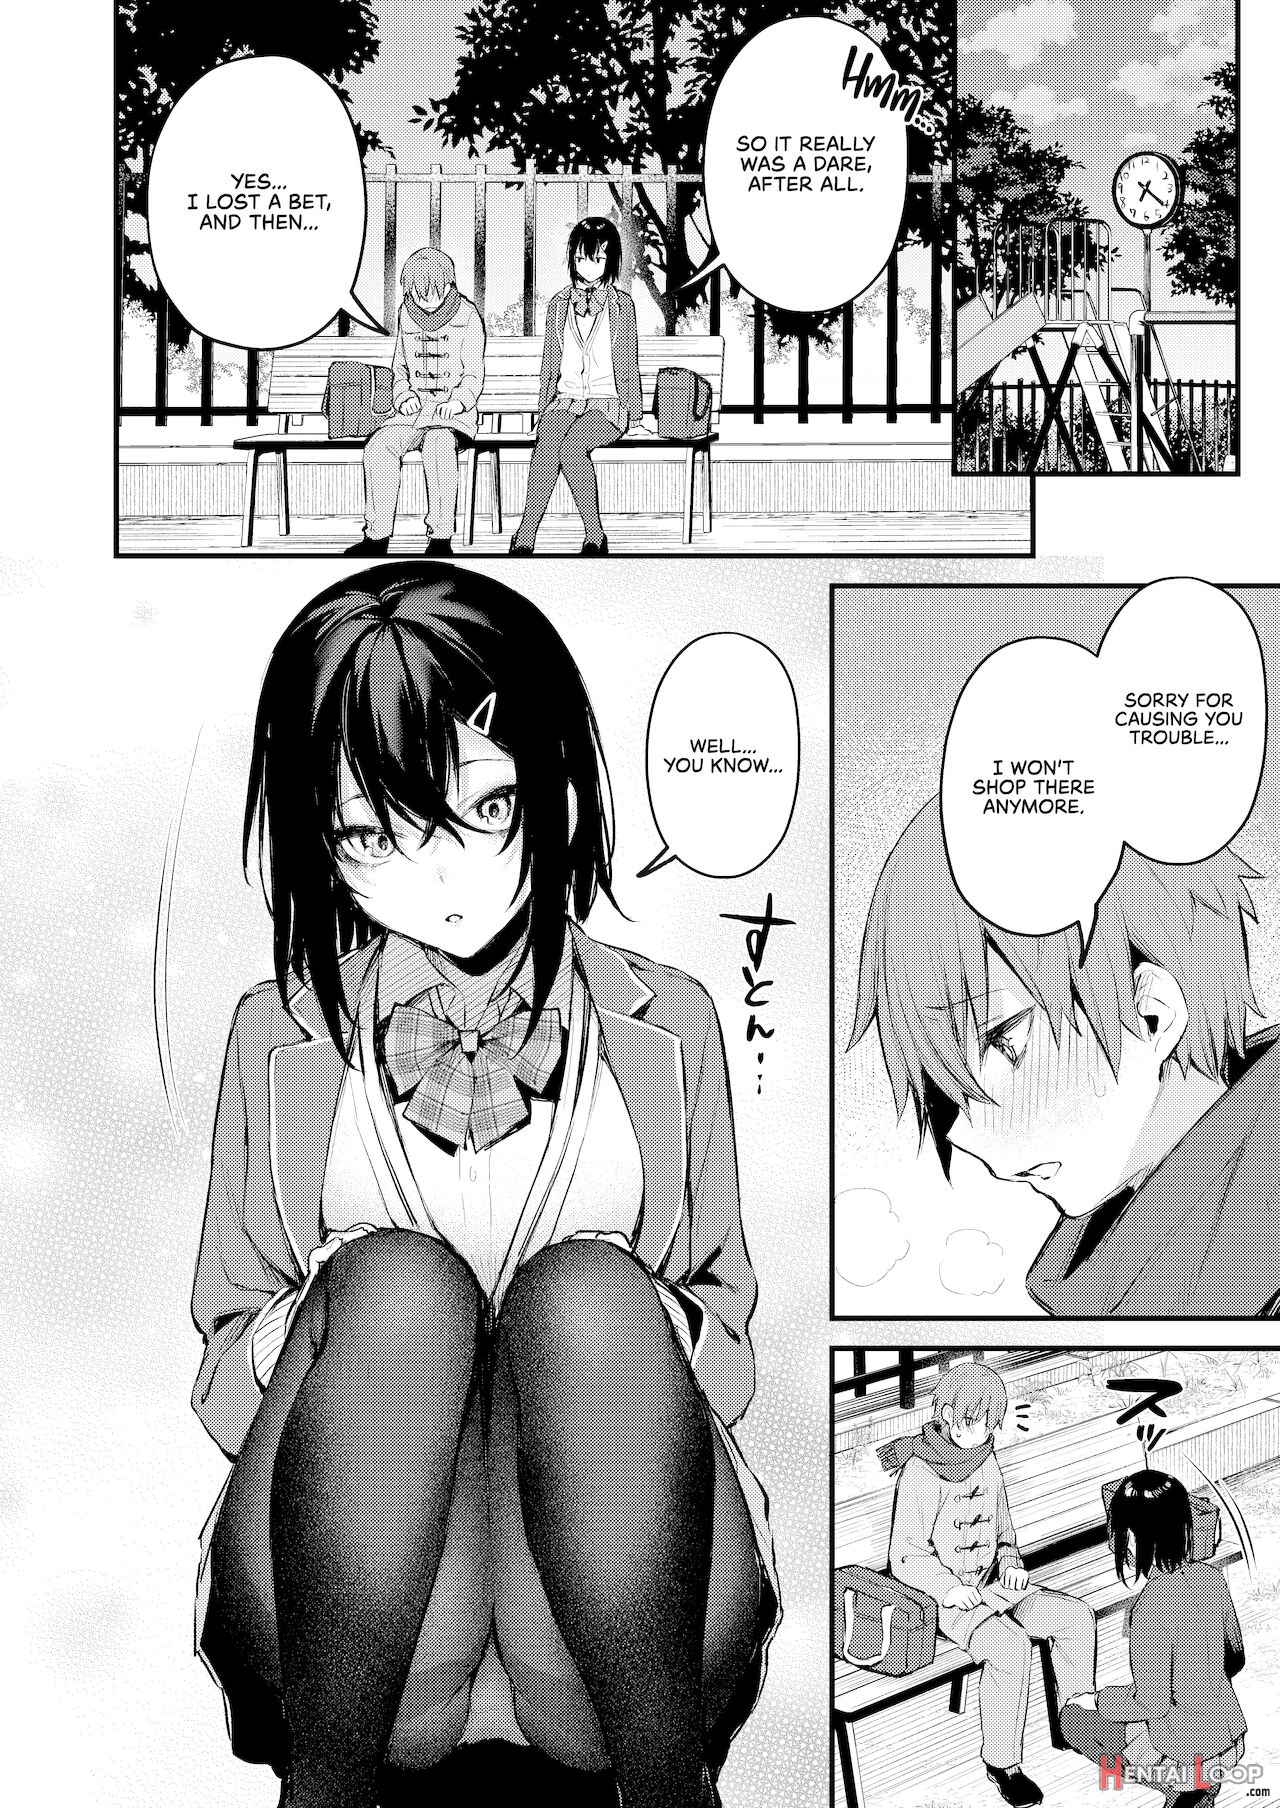 A Dare With An Onee-san page 8